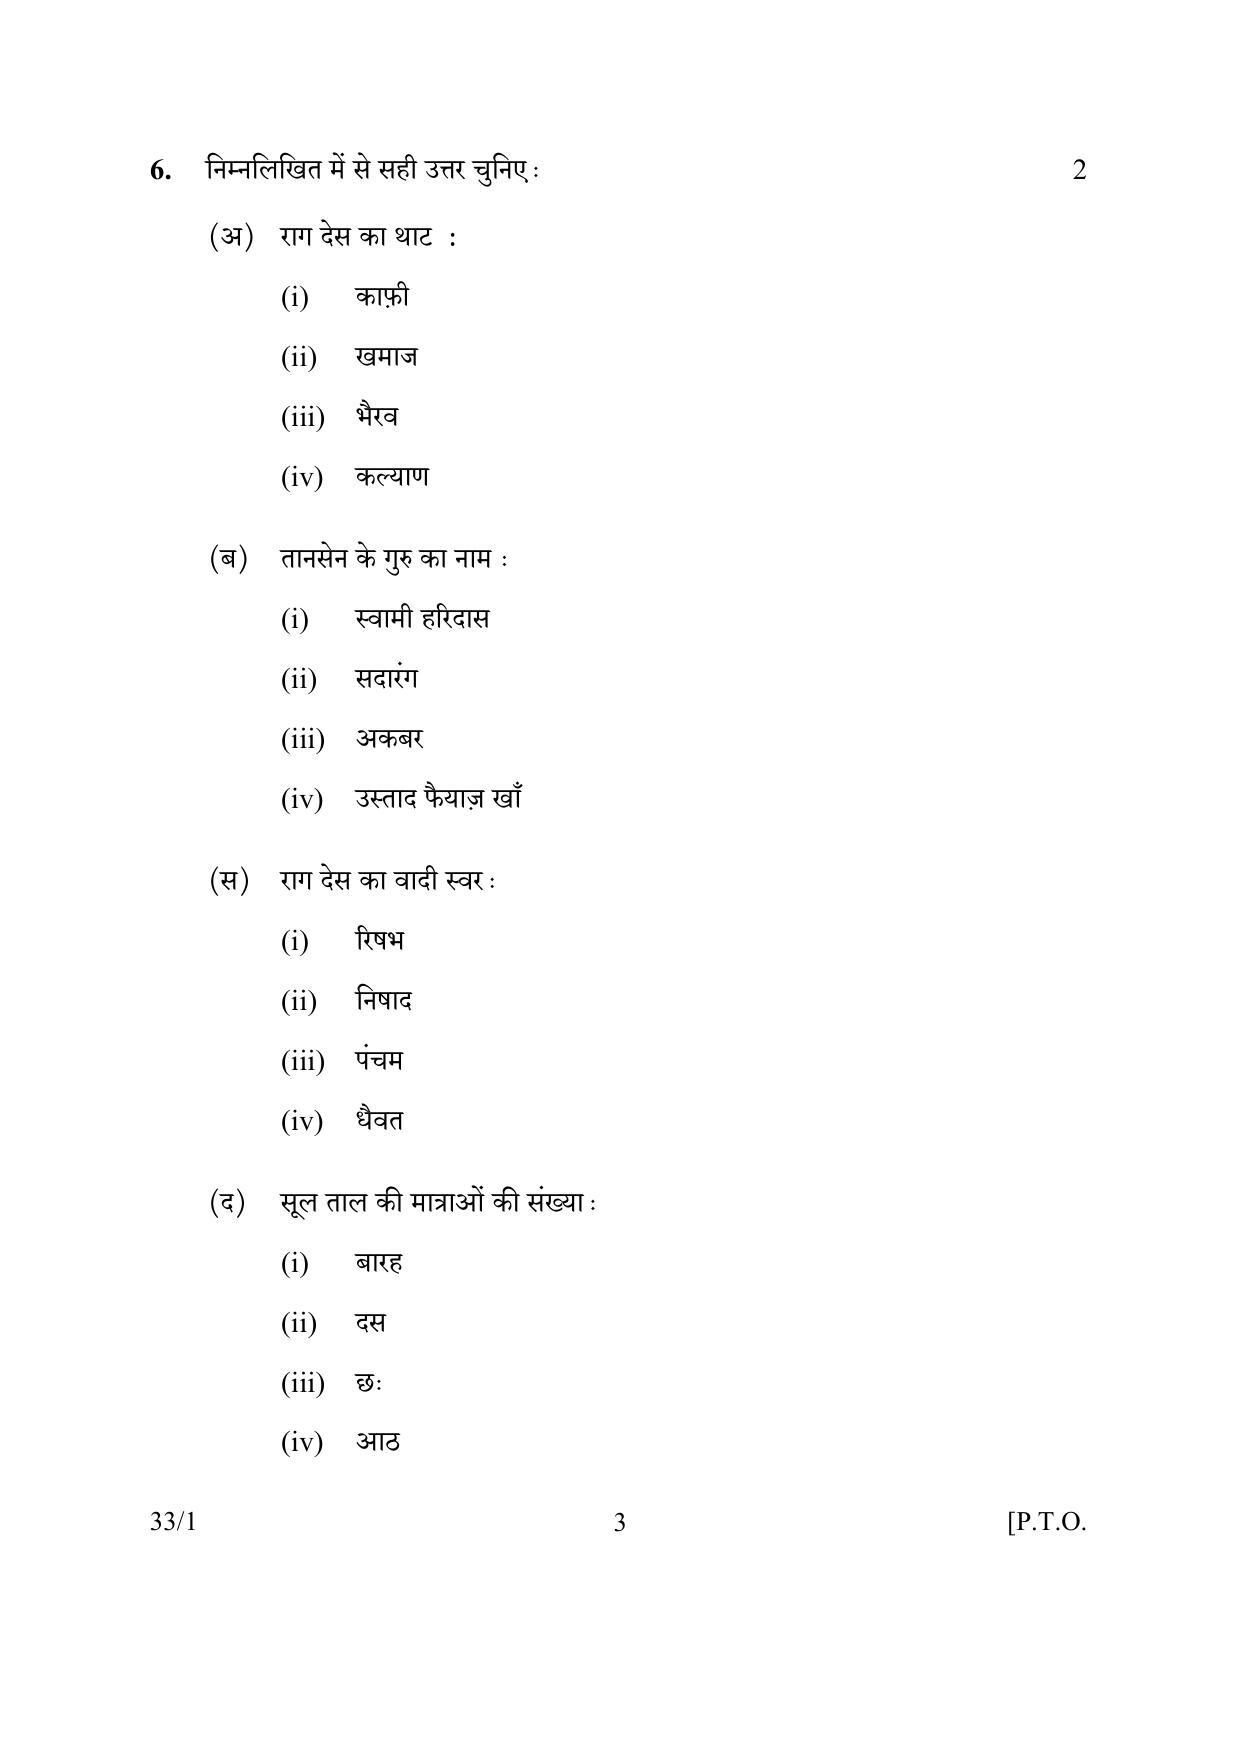 CBSE Class 10 33-1 MUSIC HINDUSTANI VOCAL 2017 Question Paper - Page 3